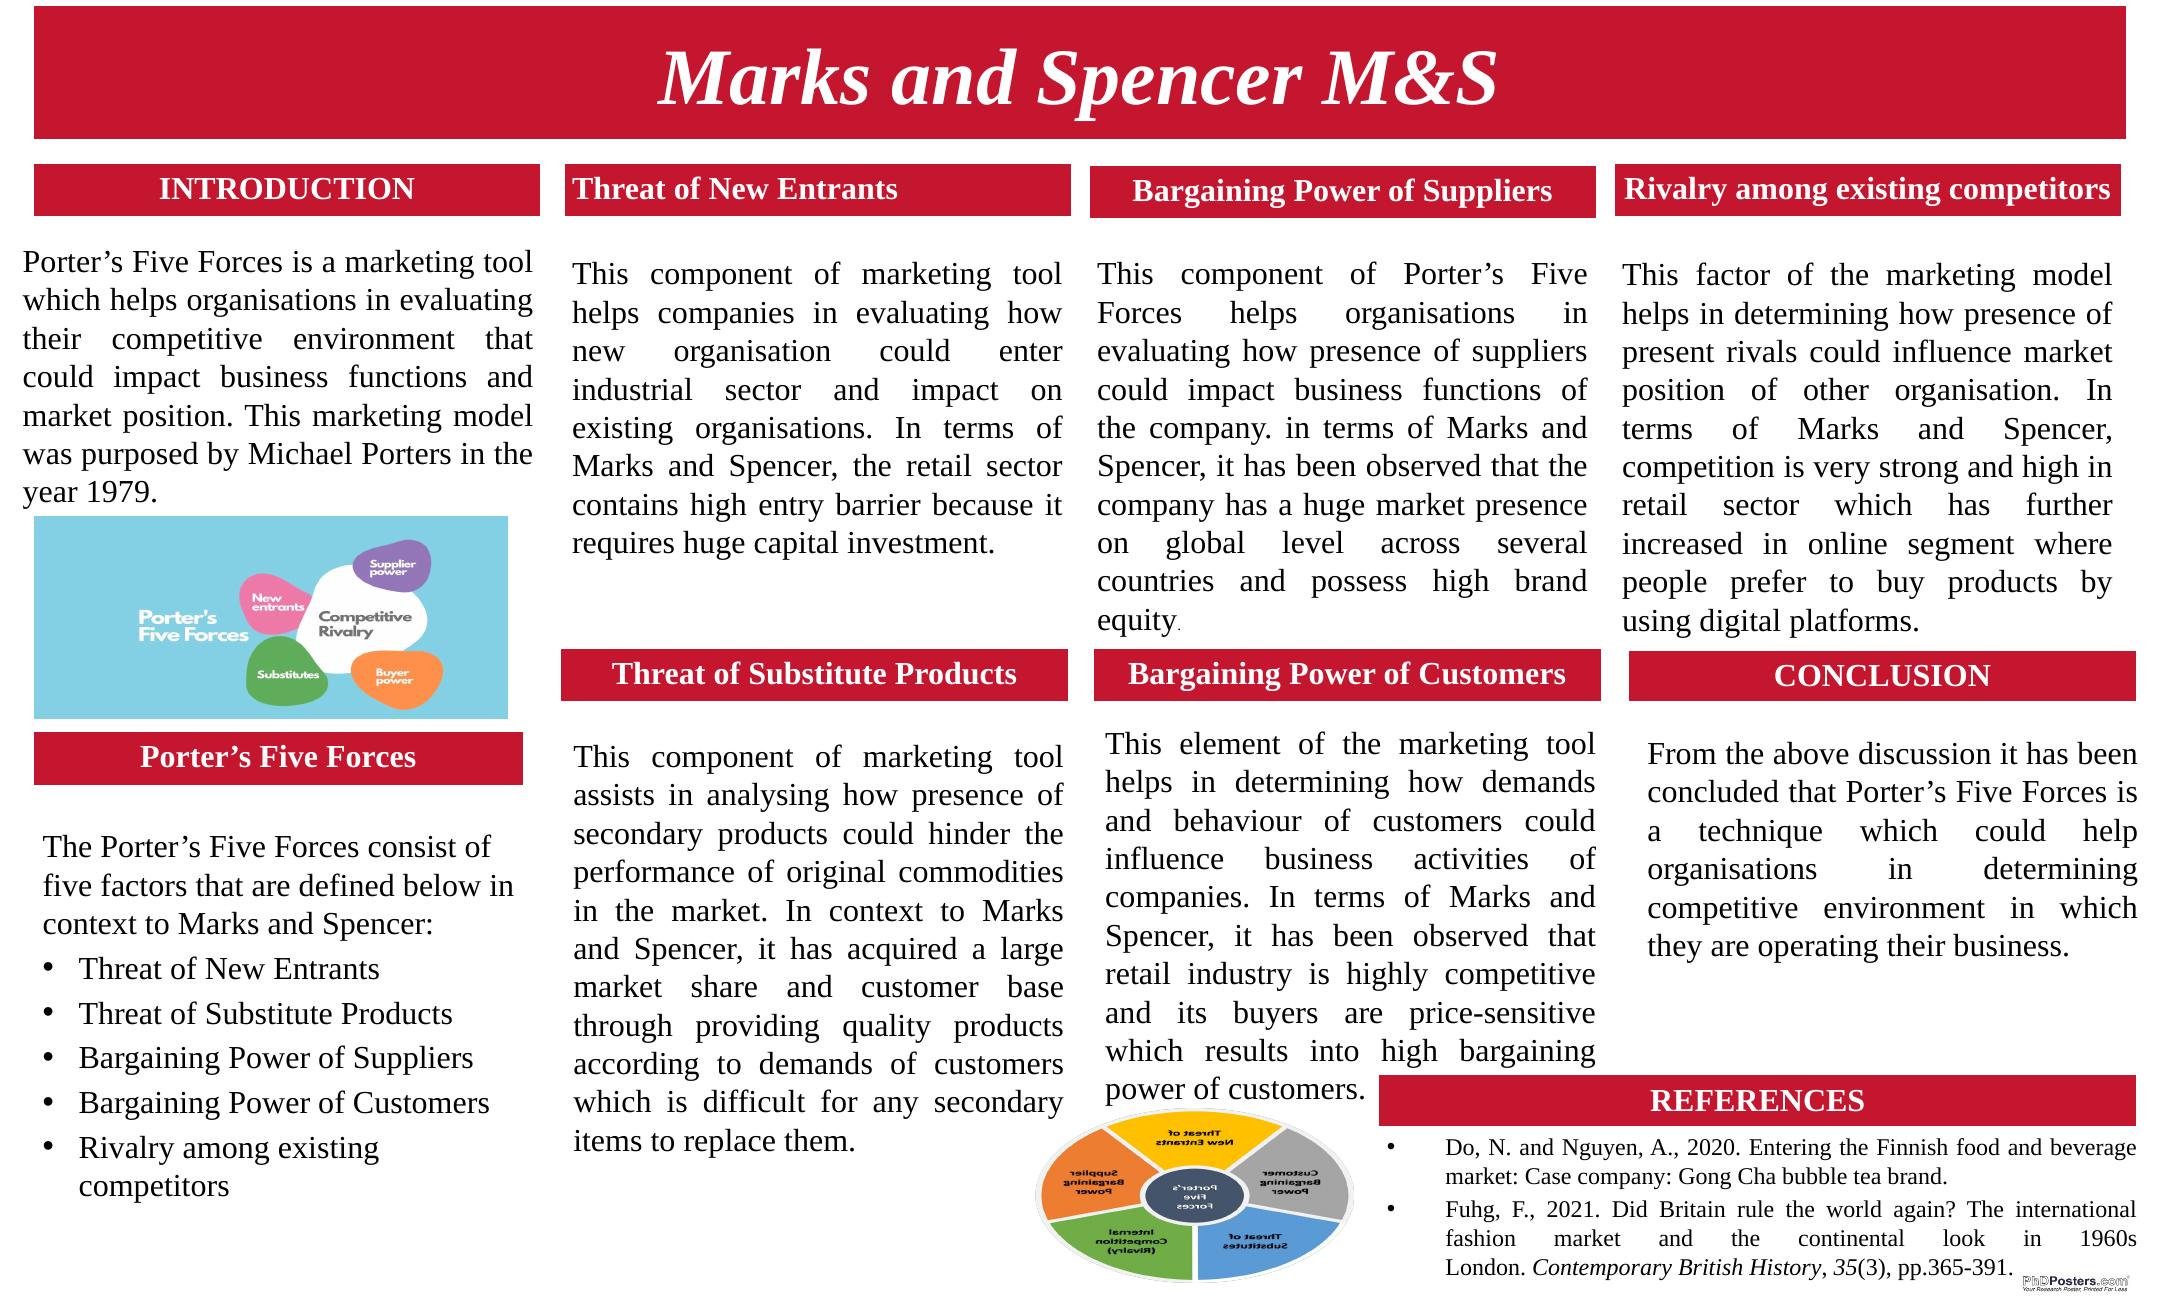 Porter’s Five Forces Analysis of Marks and Spencer (M&S)_1